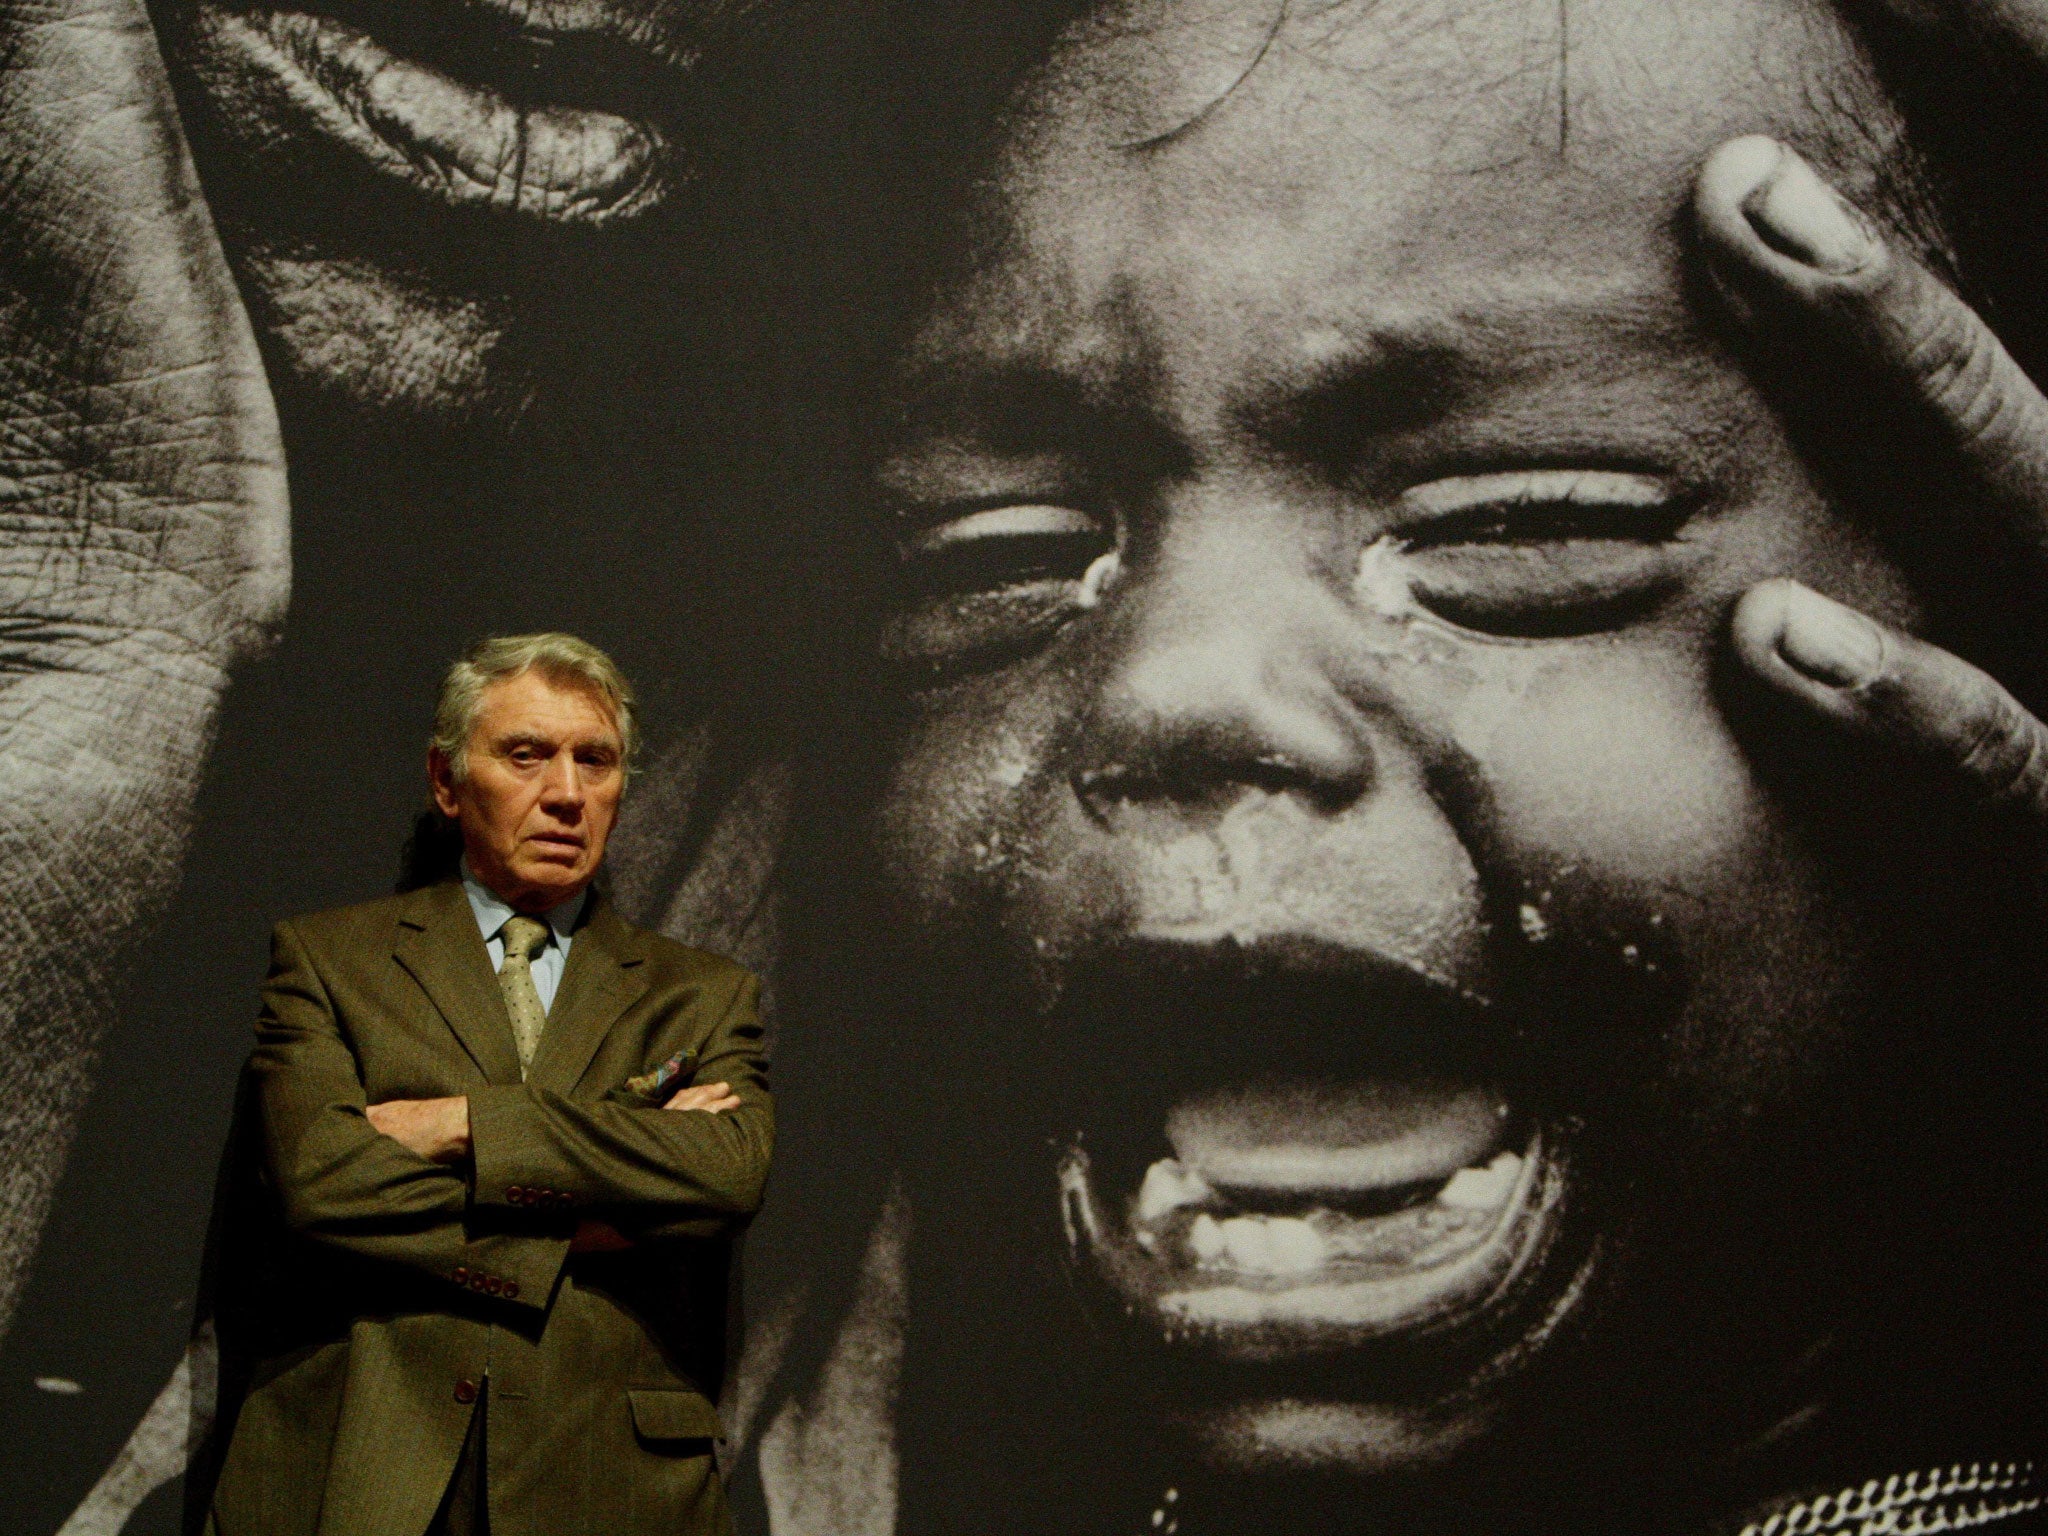 ‘Forget foreign conflicts, chronicle Britain’ says war photographer Don McCullin